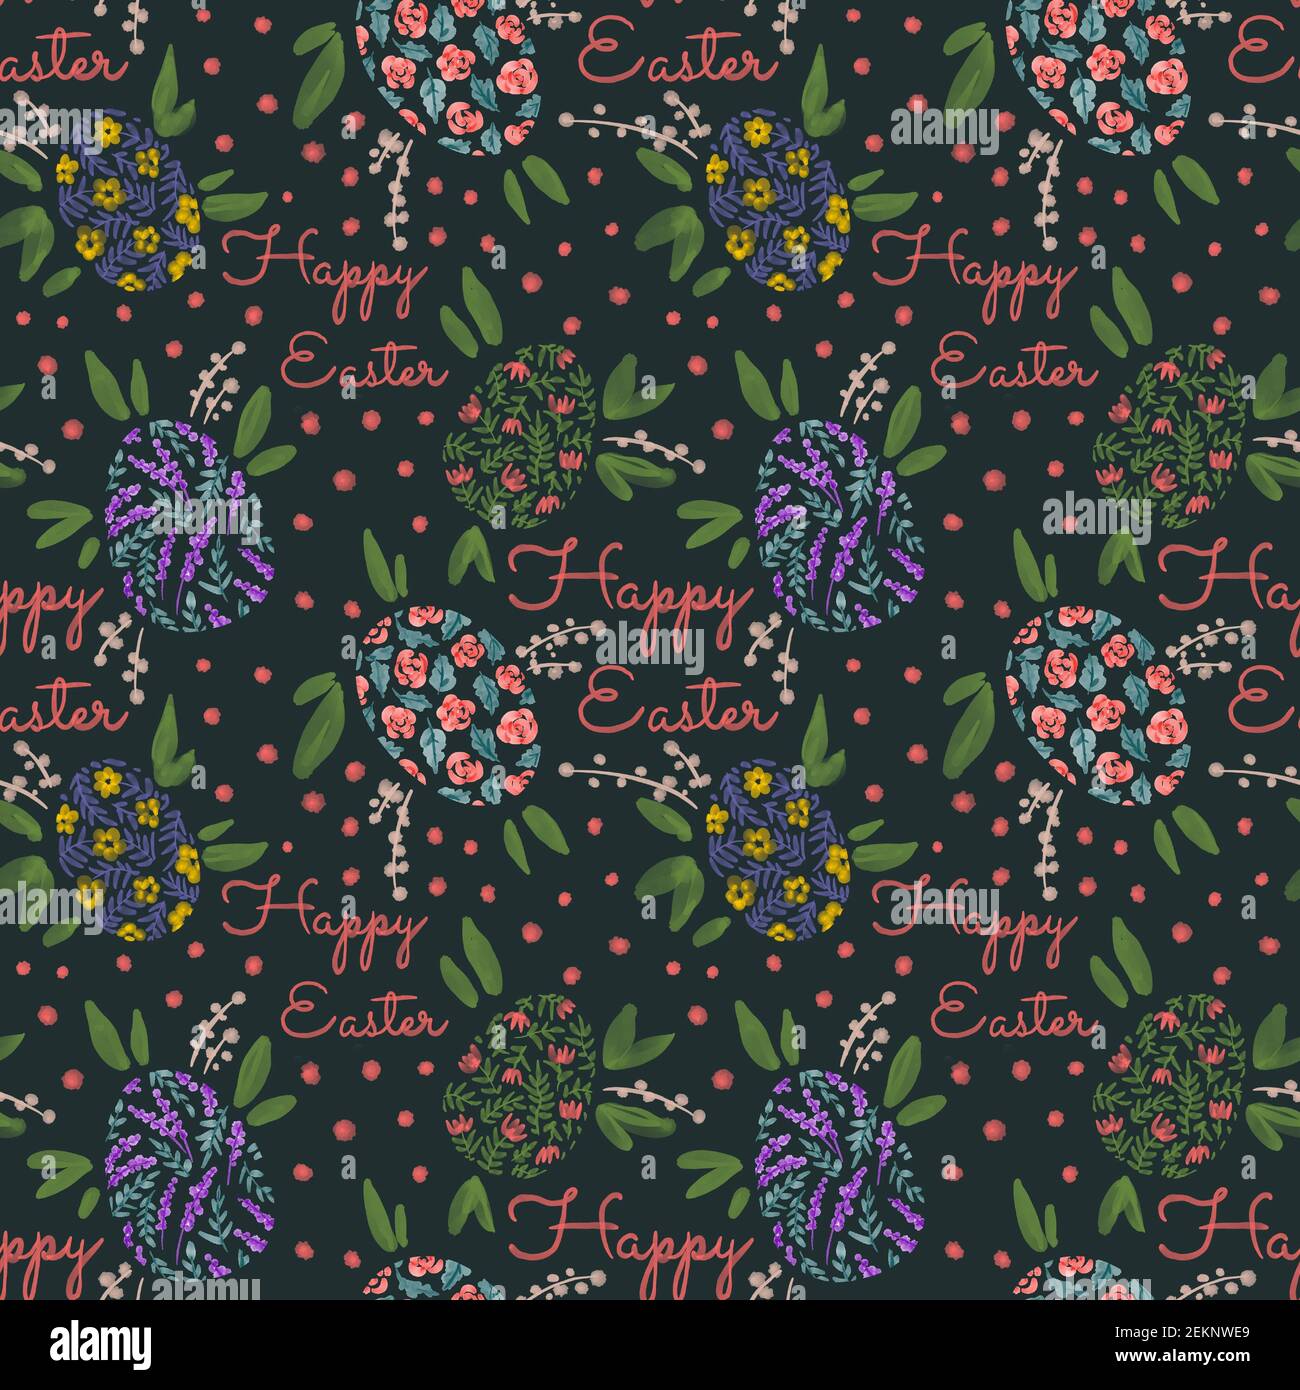 Seamless pattern with flowers, rabbits and Easter eggs Stock Photo